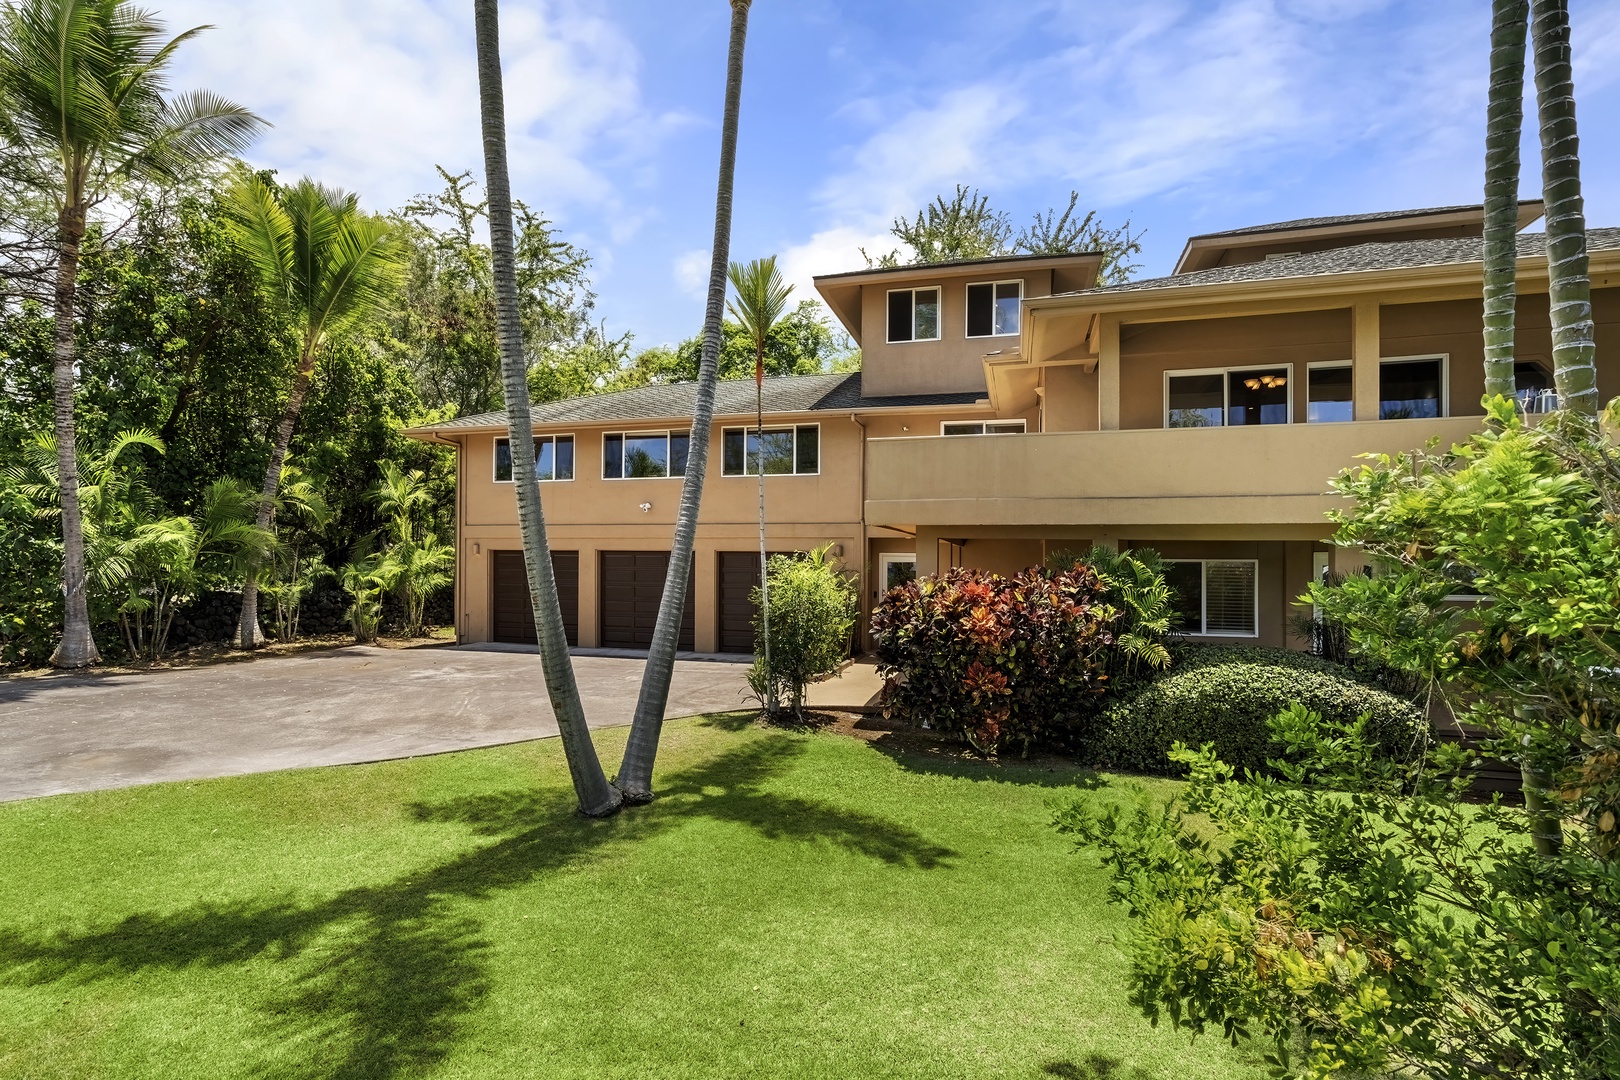 Kailua Kona Vacation Rentals, Lymans Bay Hale - Lush and manicured front lawn